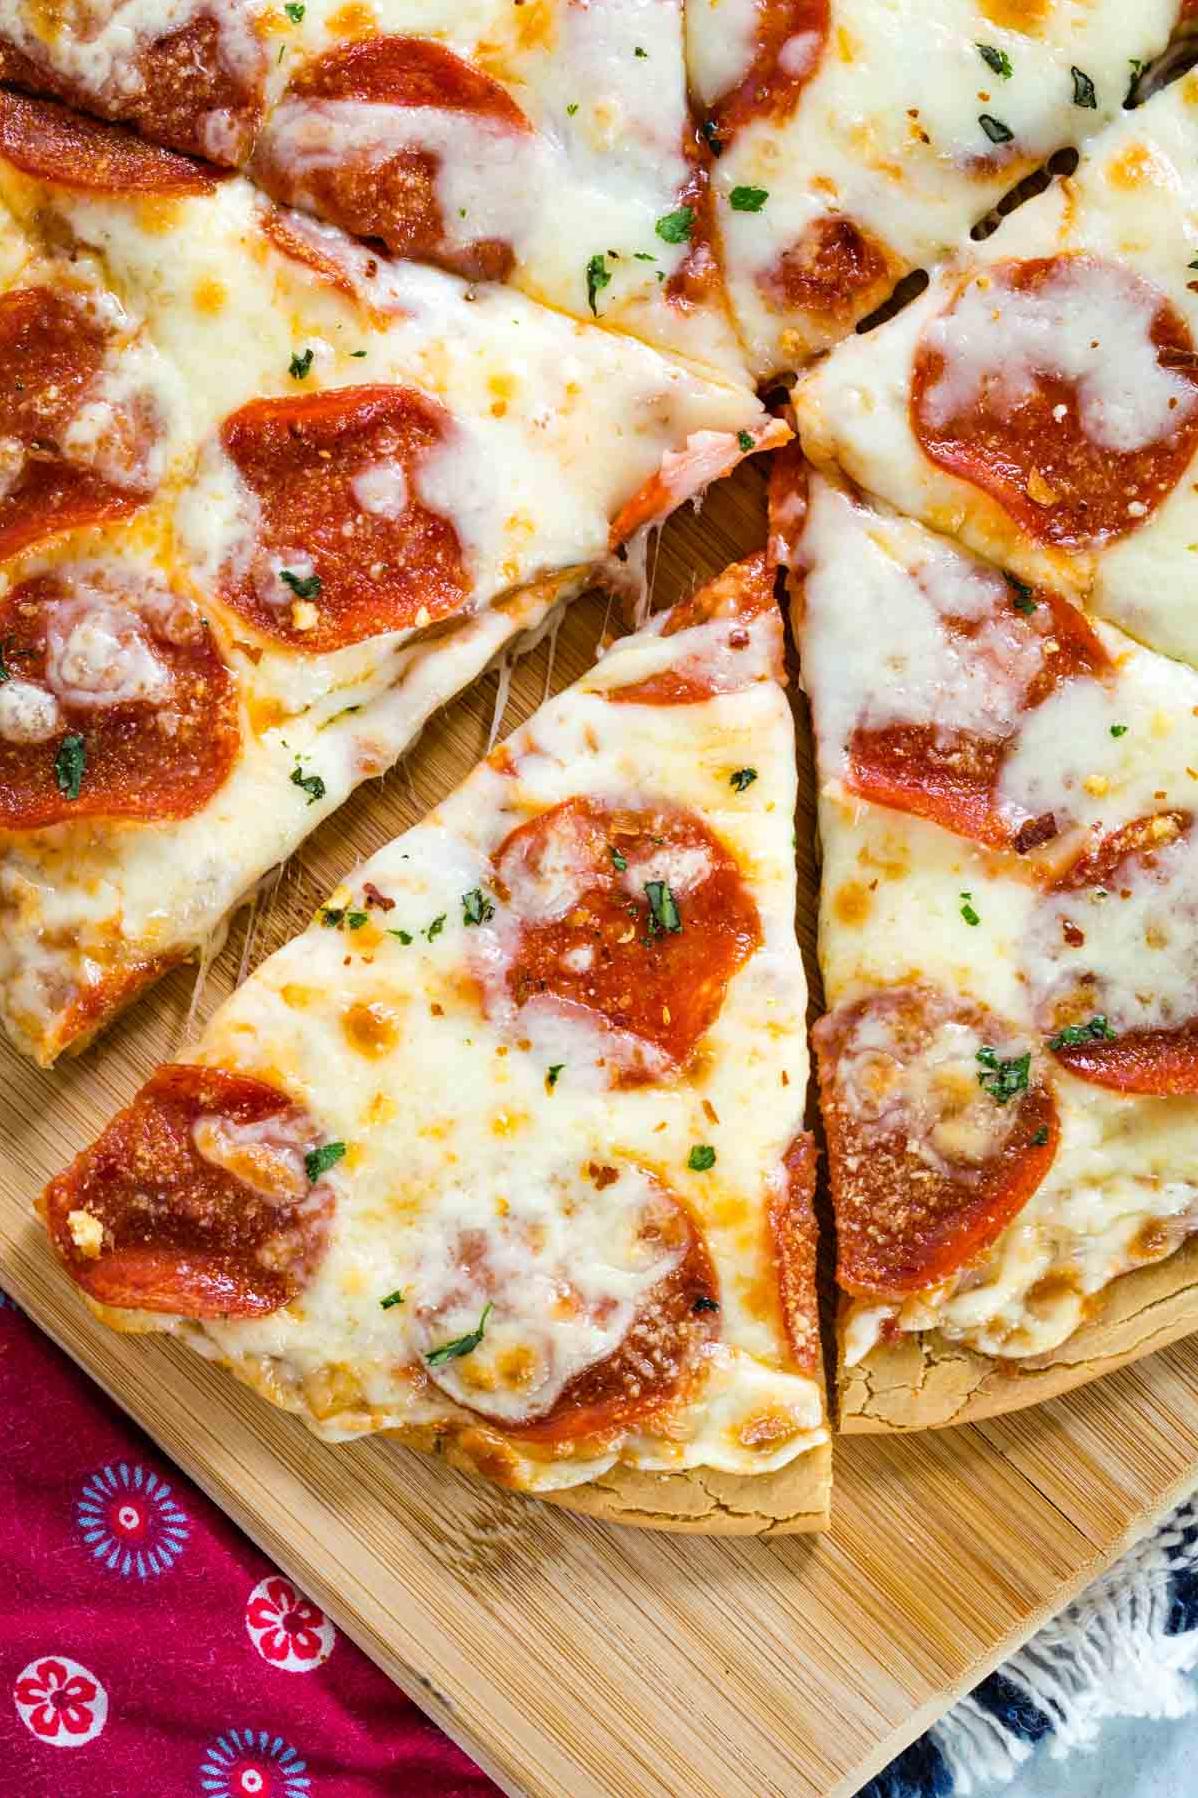  A crispy yet chewy gluten-free crust serves as the perfect foundation for this Pepperoni Pizza Pie.